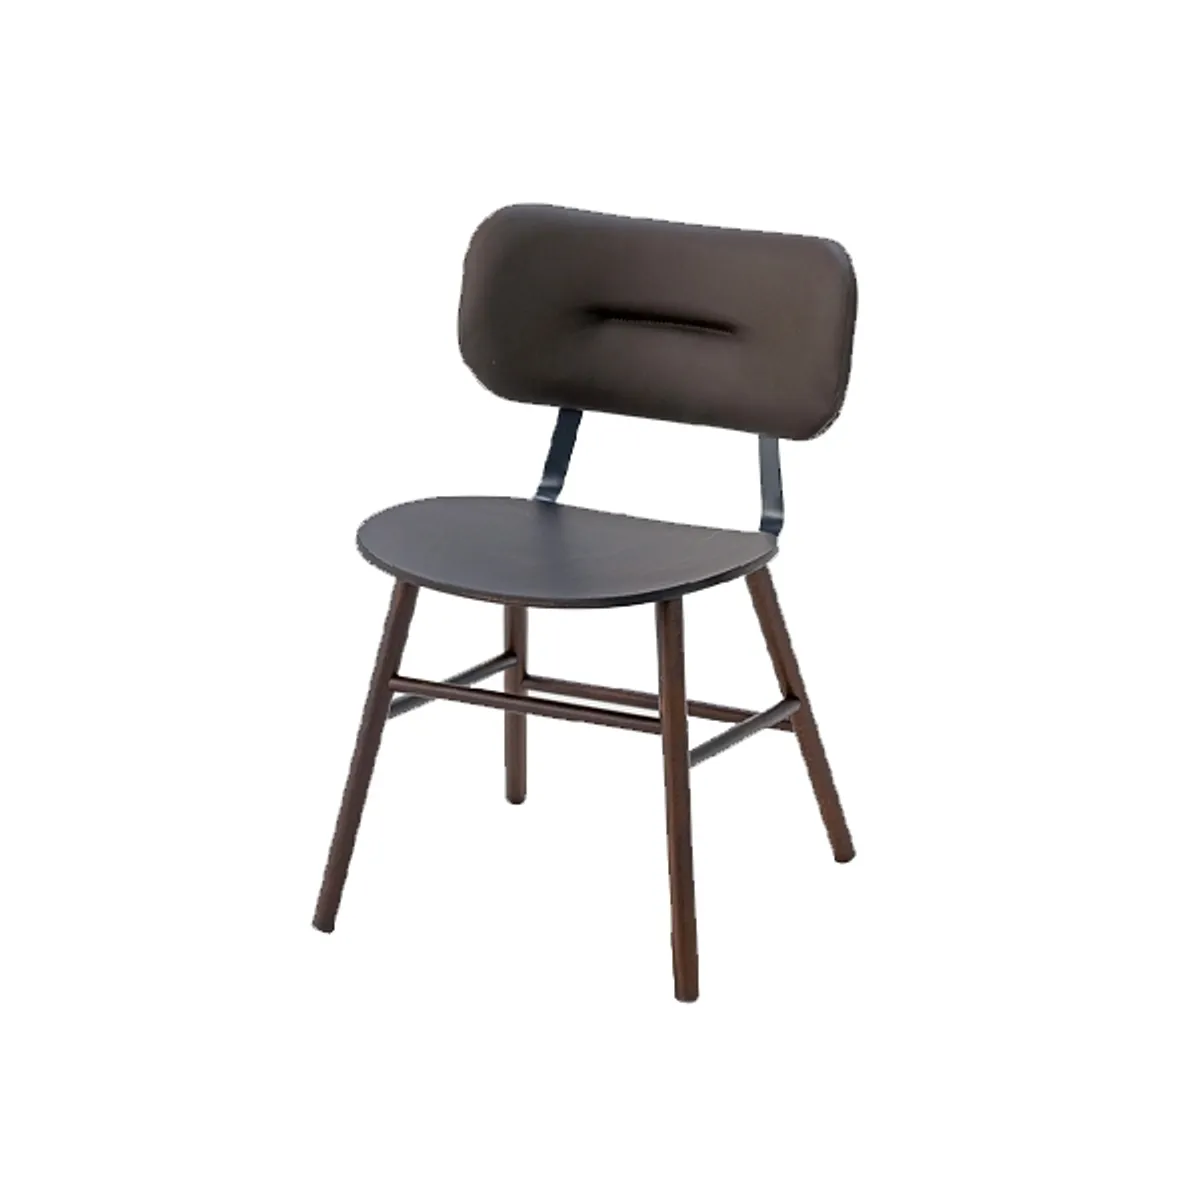 Demie chair Inside Out Contracts3